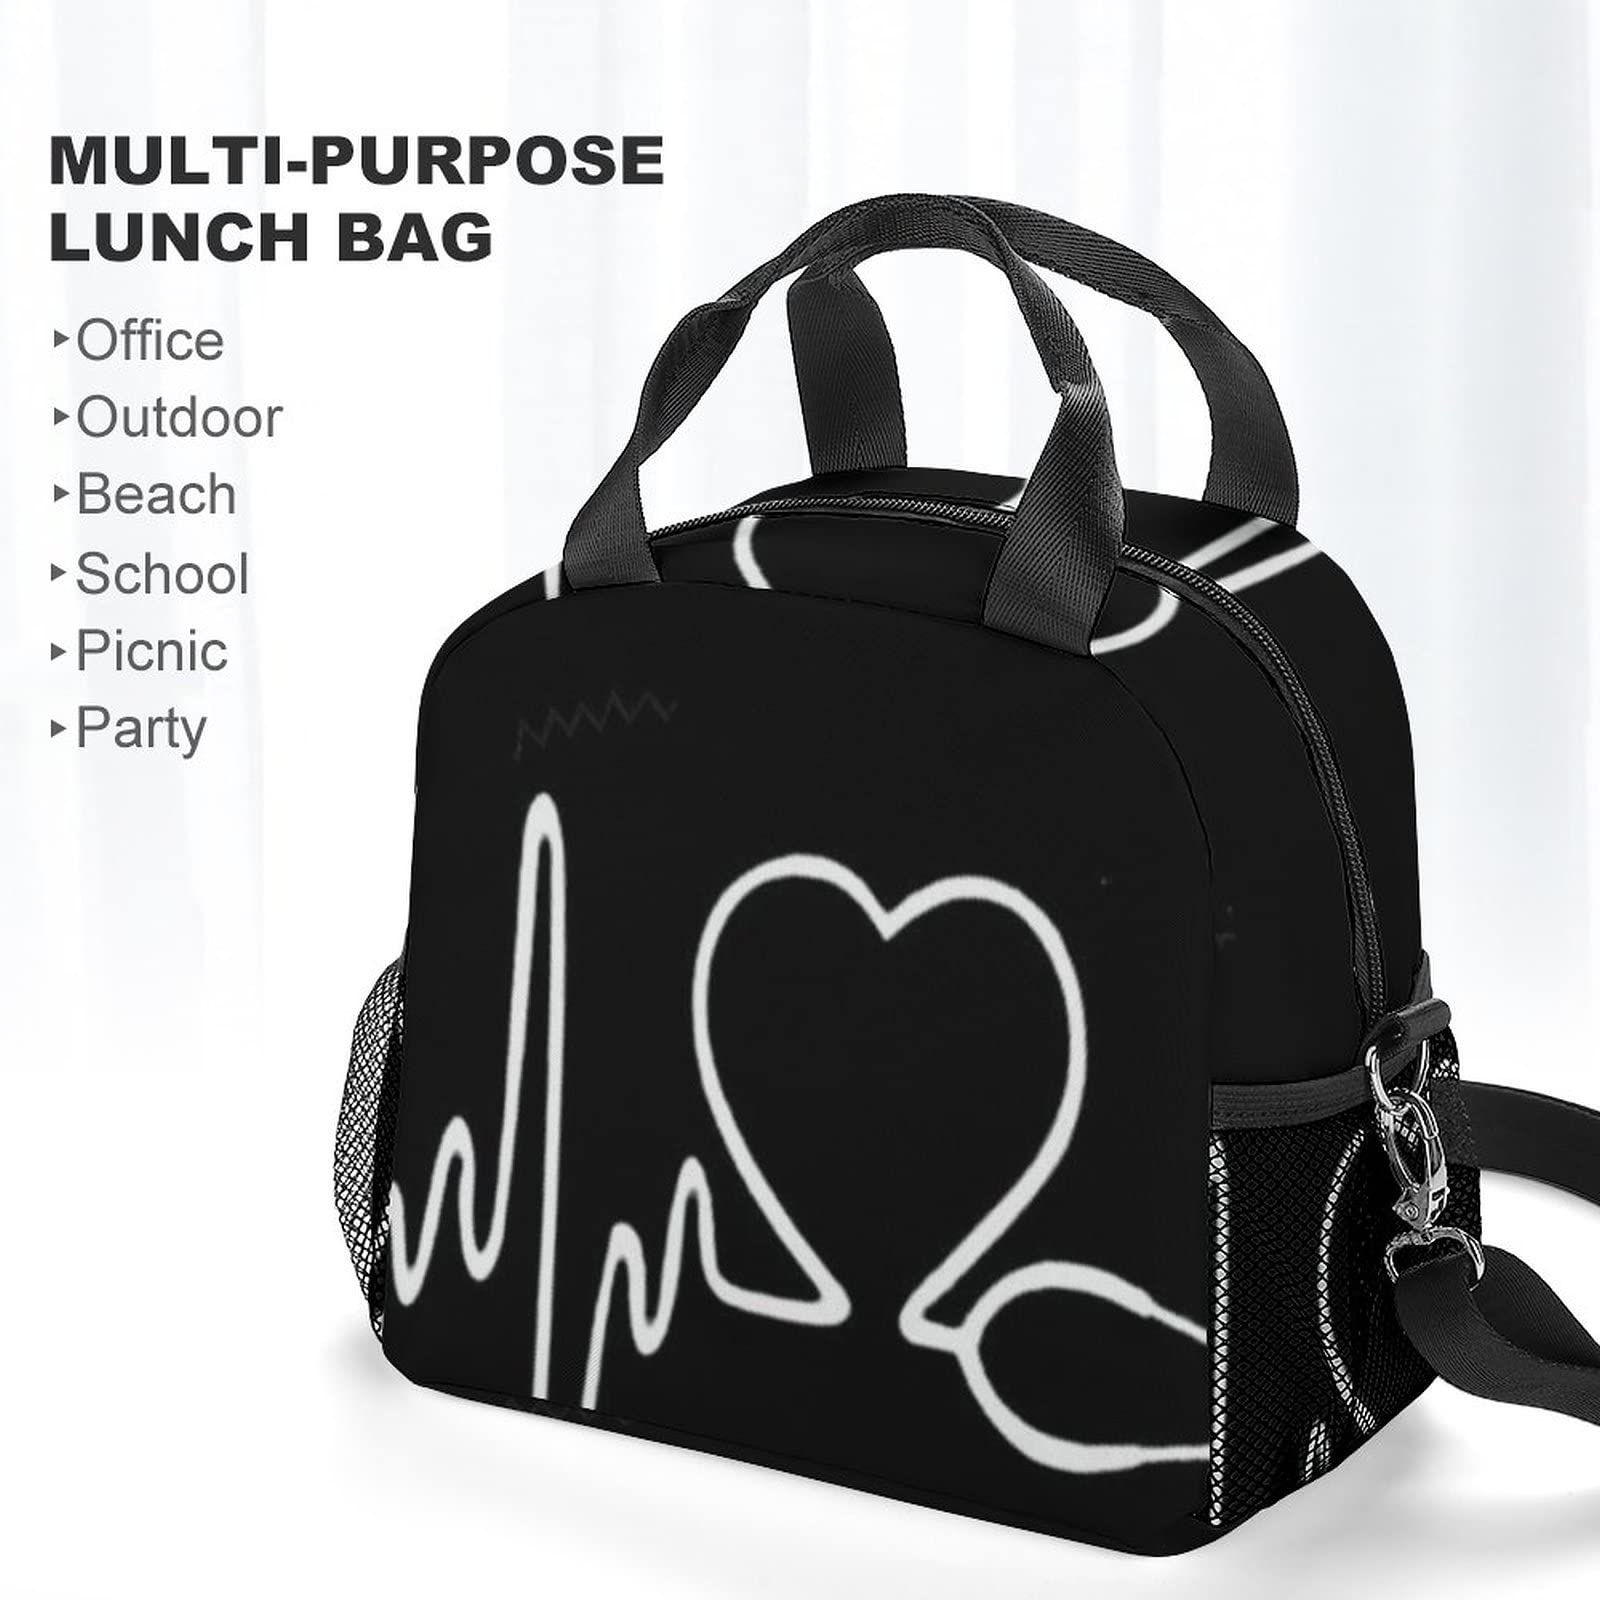 AMRANDOM Adults Reusable Compatible with Nurse Heartbeat Designed Black Lunch Bag with Shoulder Adjustable Strap Thermal Cooler Lunch Tote Lunch Box Handbag for Work Outdoor Travel Picnic